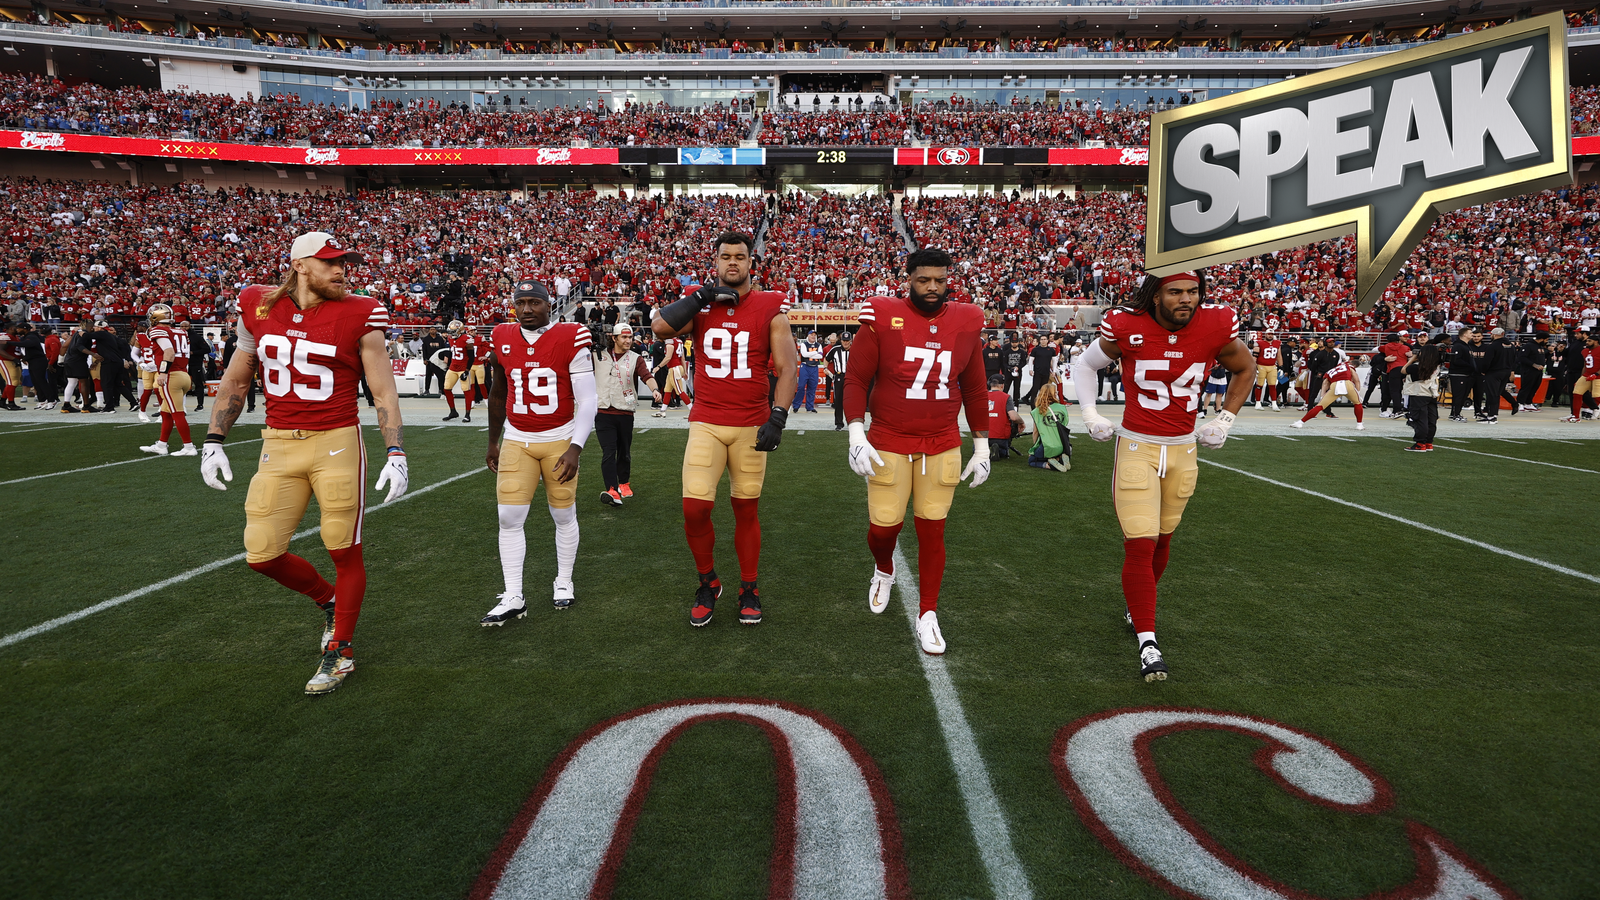 Is there more pressure on the 49ers offense or defense?